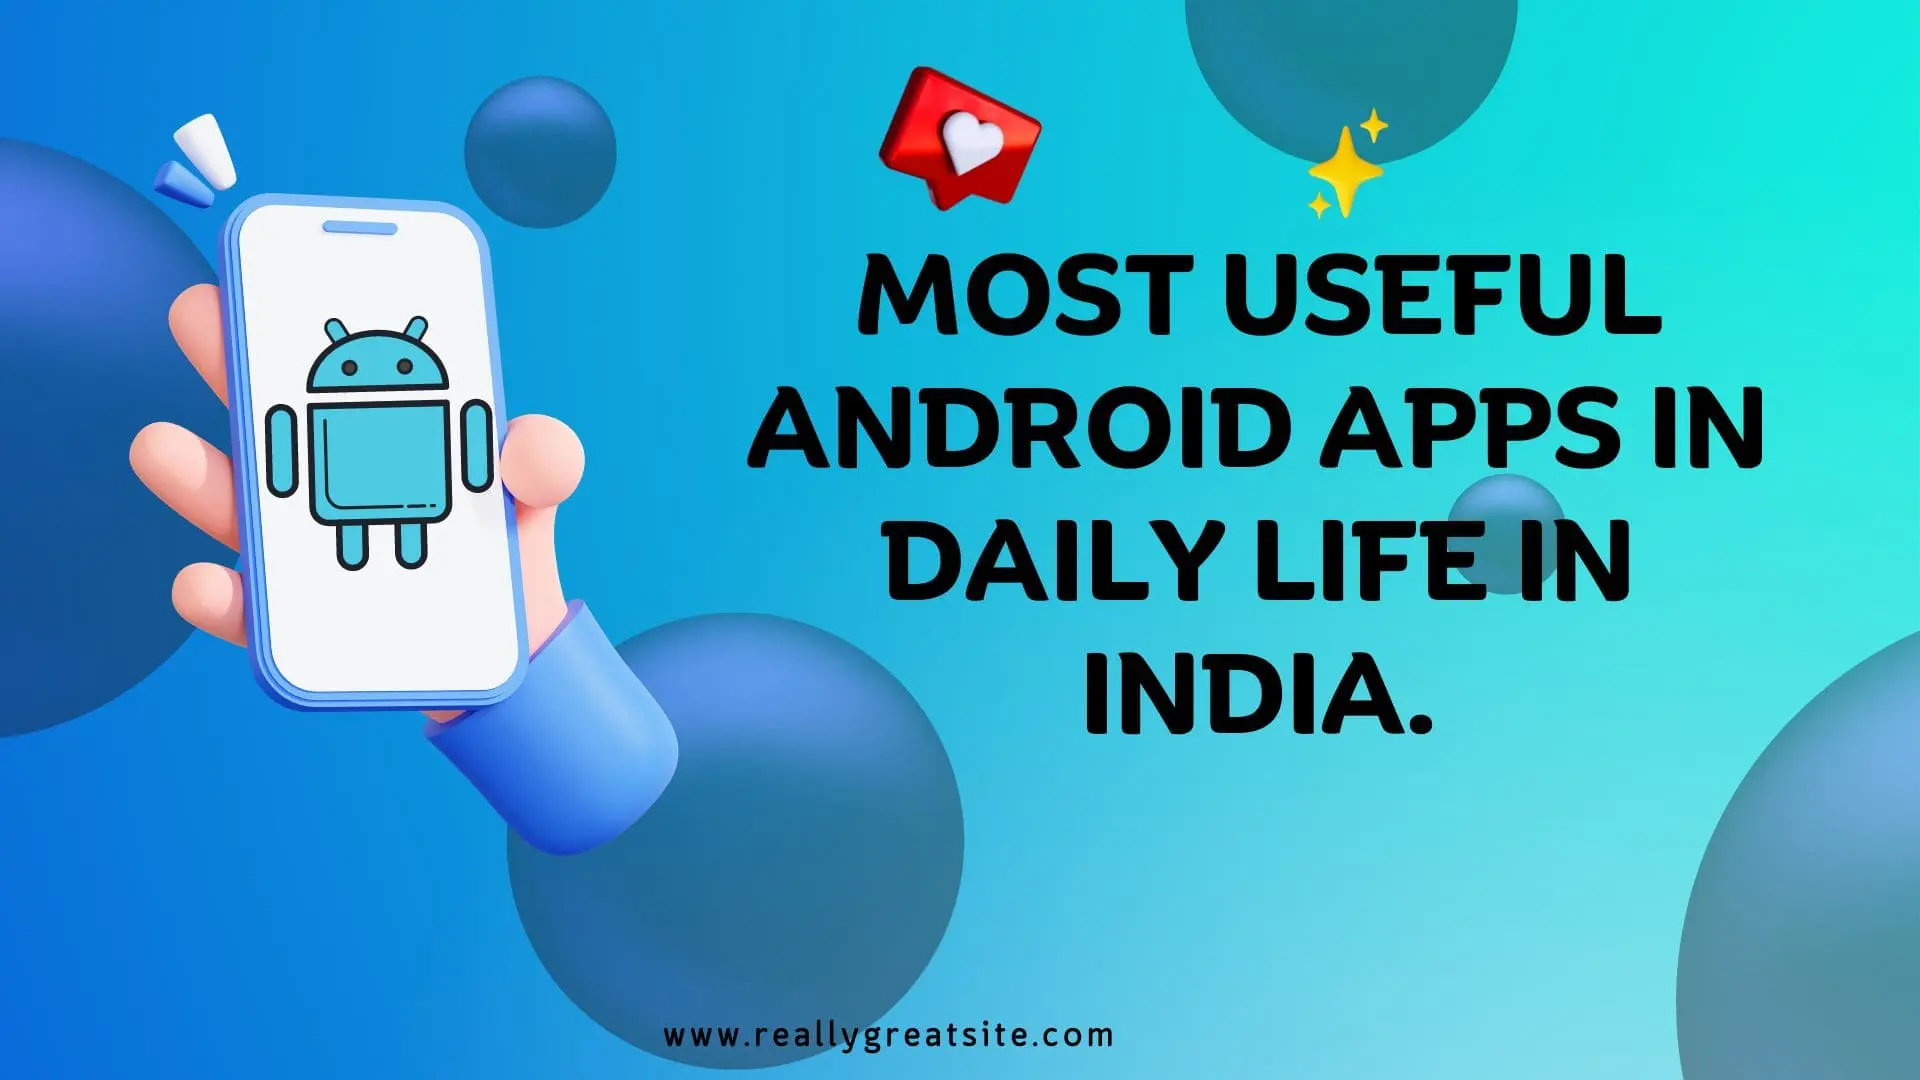 Most useful Android apps in daily life in India.